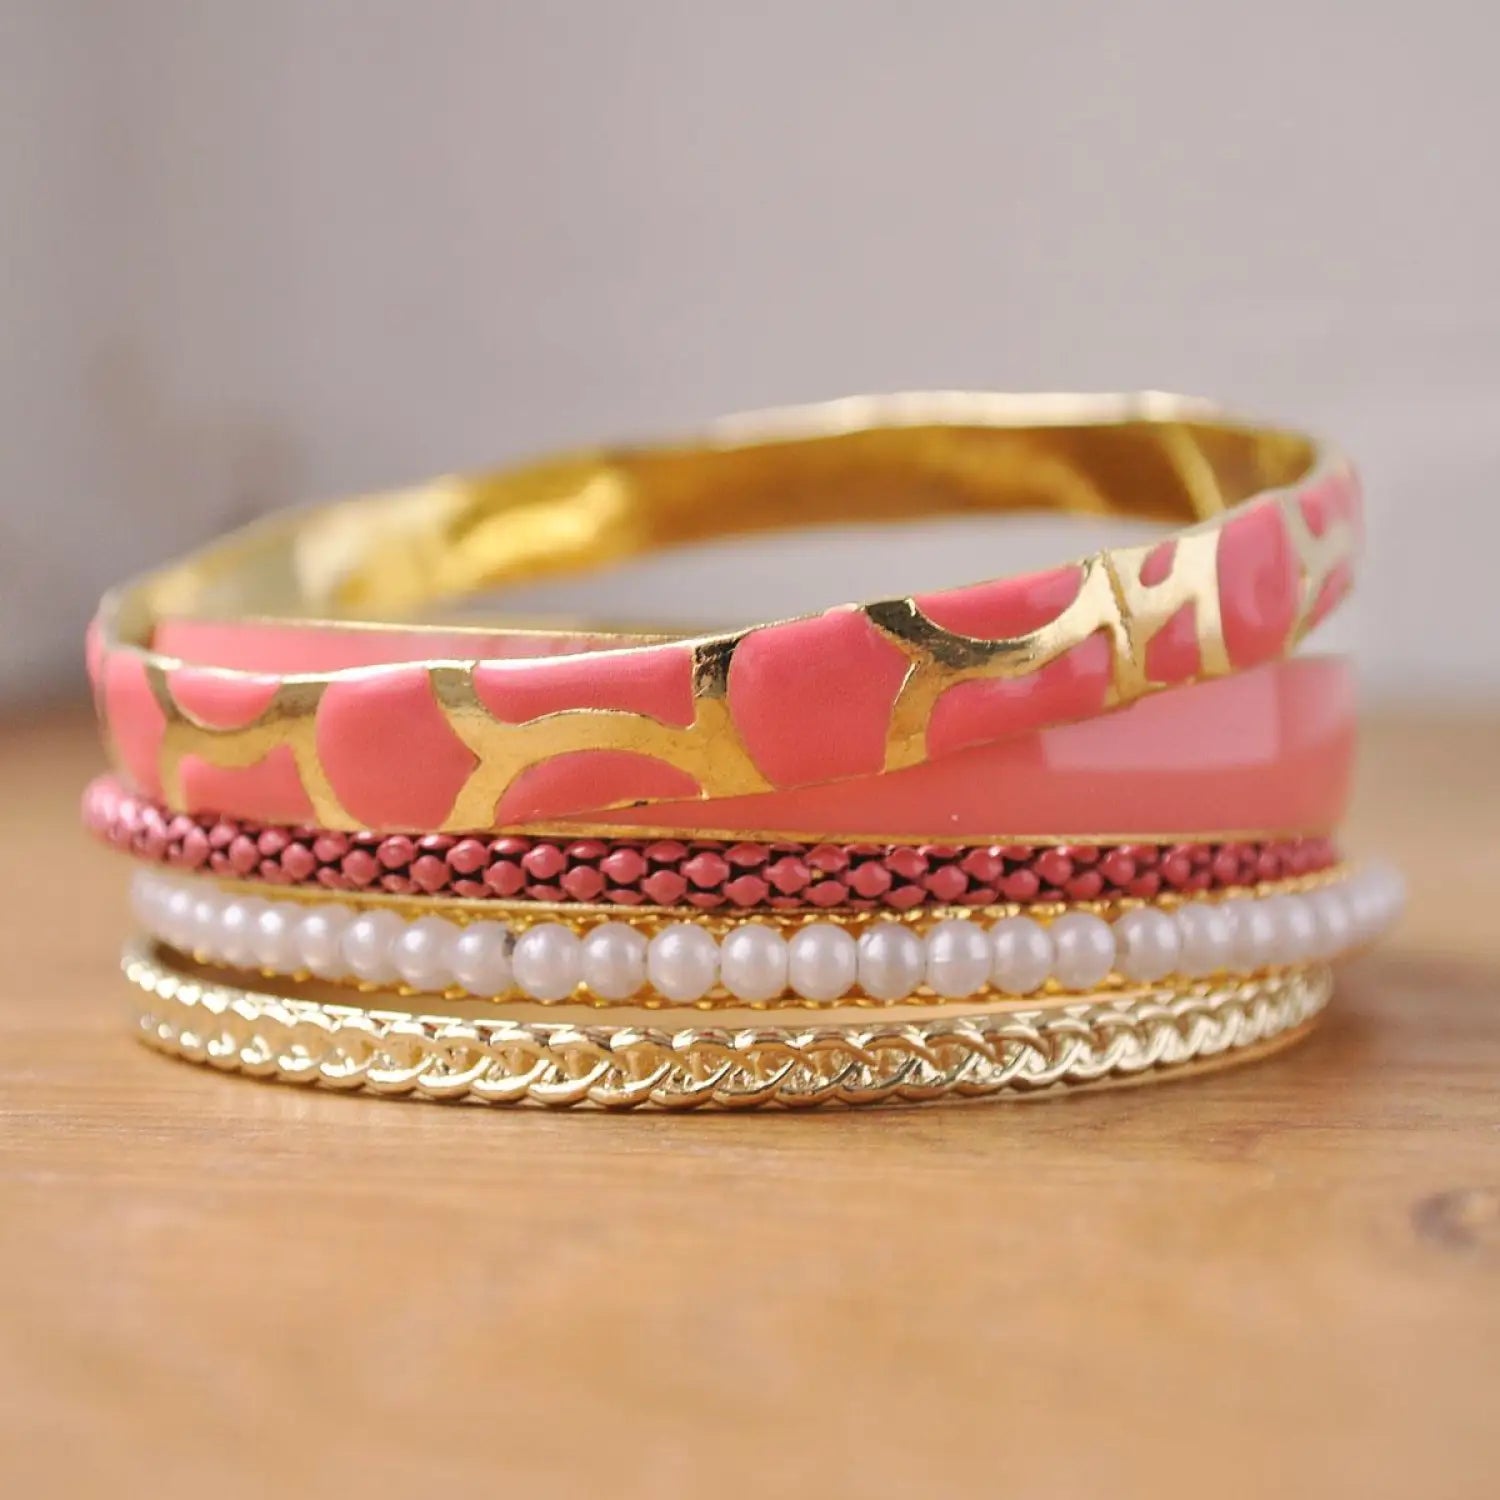 Pink and gold metal stackable bangles for Indian wedding - product display.